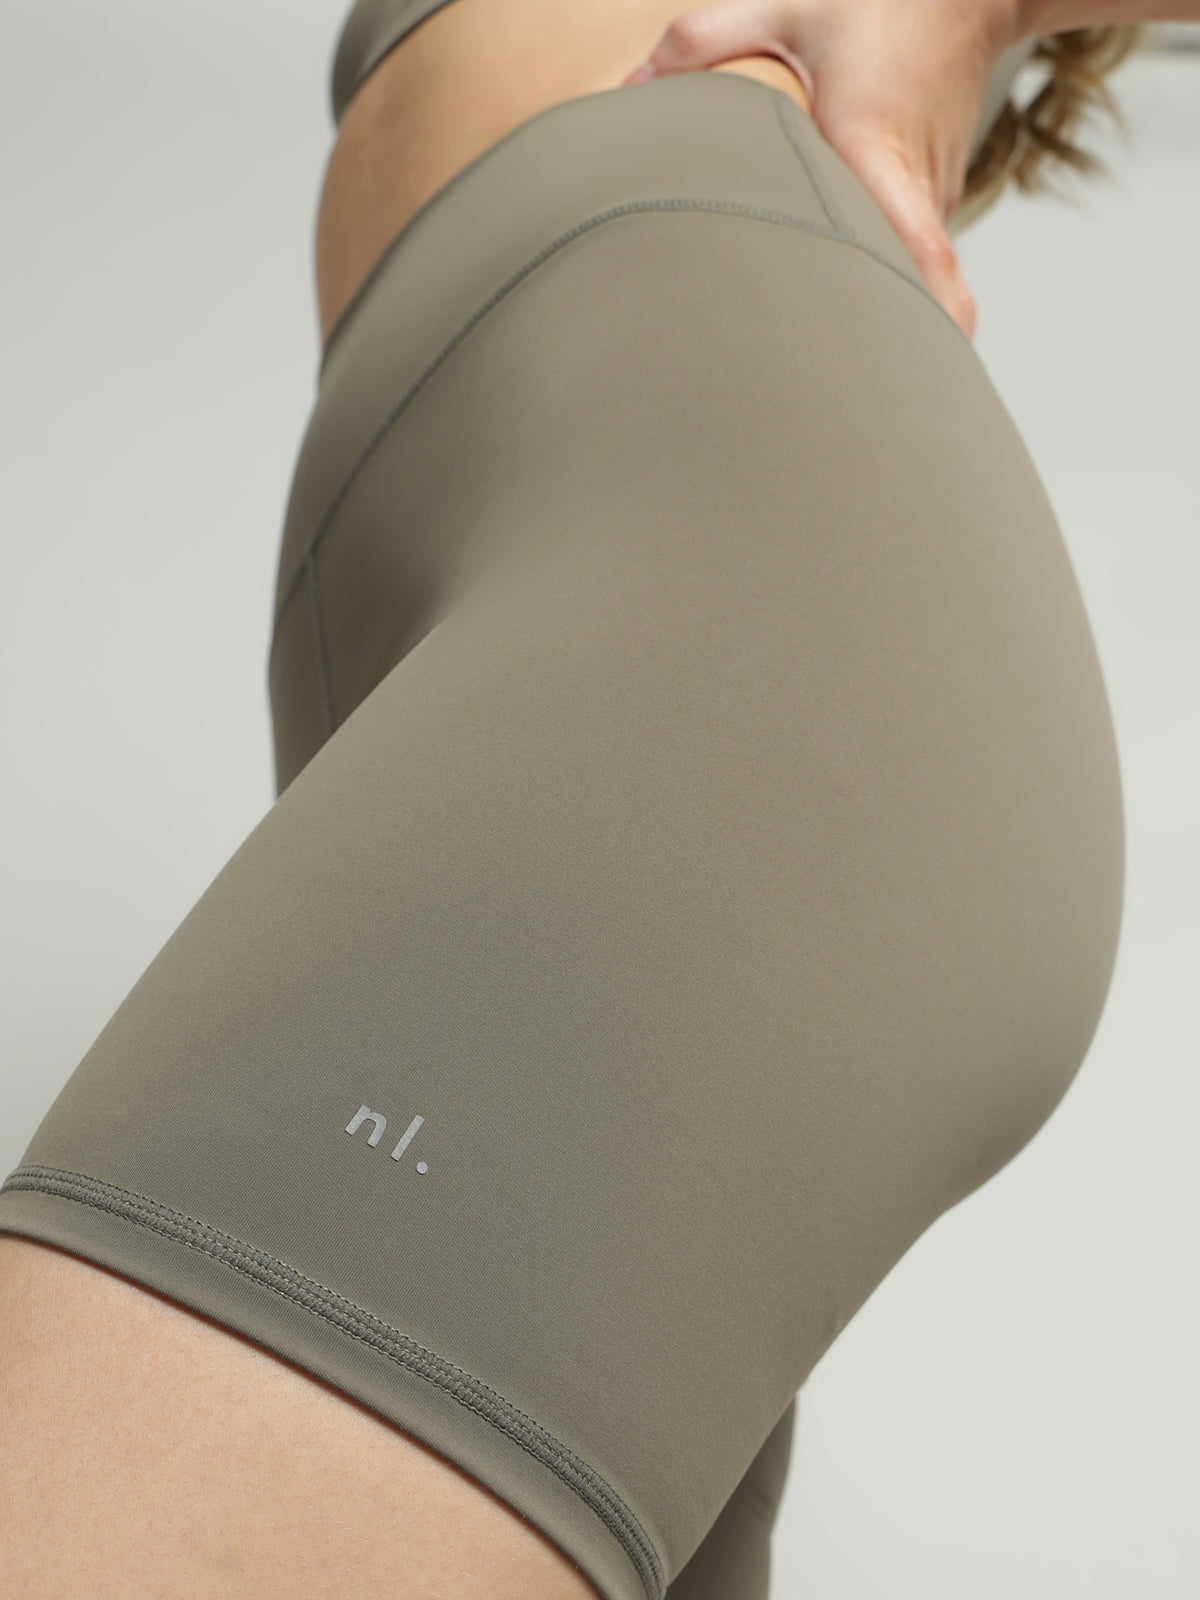 Nude Active High-Rise Bike Shorts in Olive Green